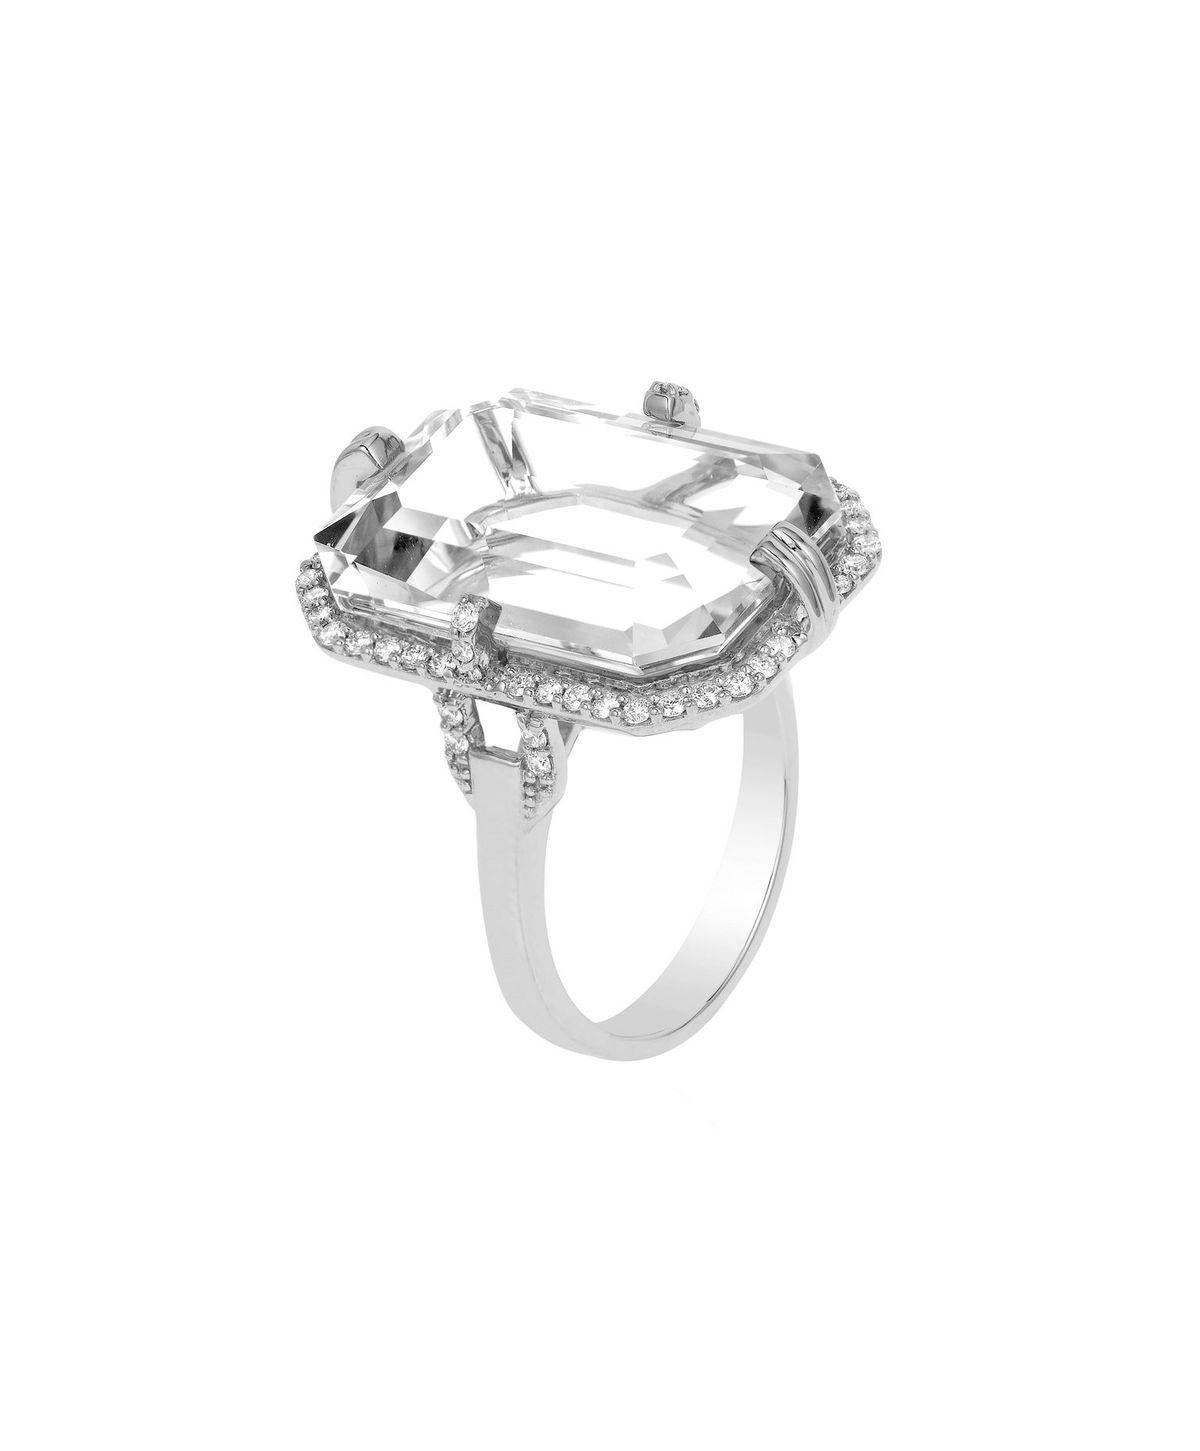 Rock Crystal Emerald Cut Ring with Diamonds in 18K White Gold, From 'Gossip' Collection

Stone Size: 20 x 14 mm 

Gemstone Approx Wt: Rock Crystal- 16.95 Carats

Diamonds: G-H / VS, Approx Wt: 0.41 Carats